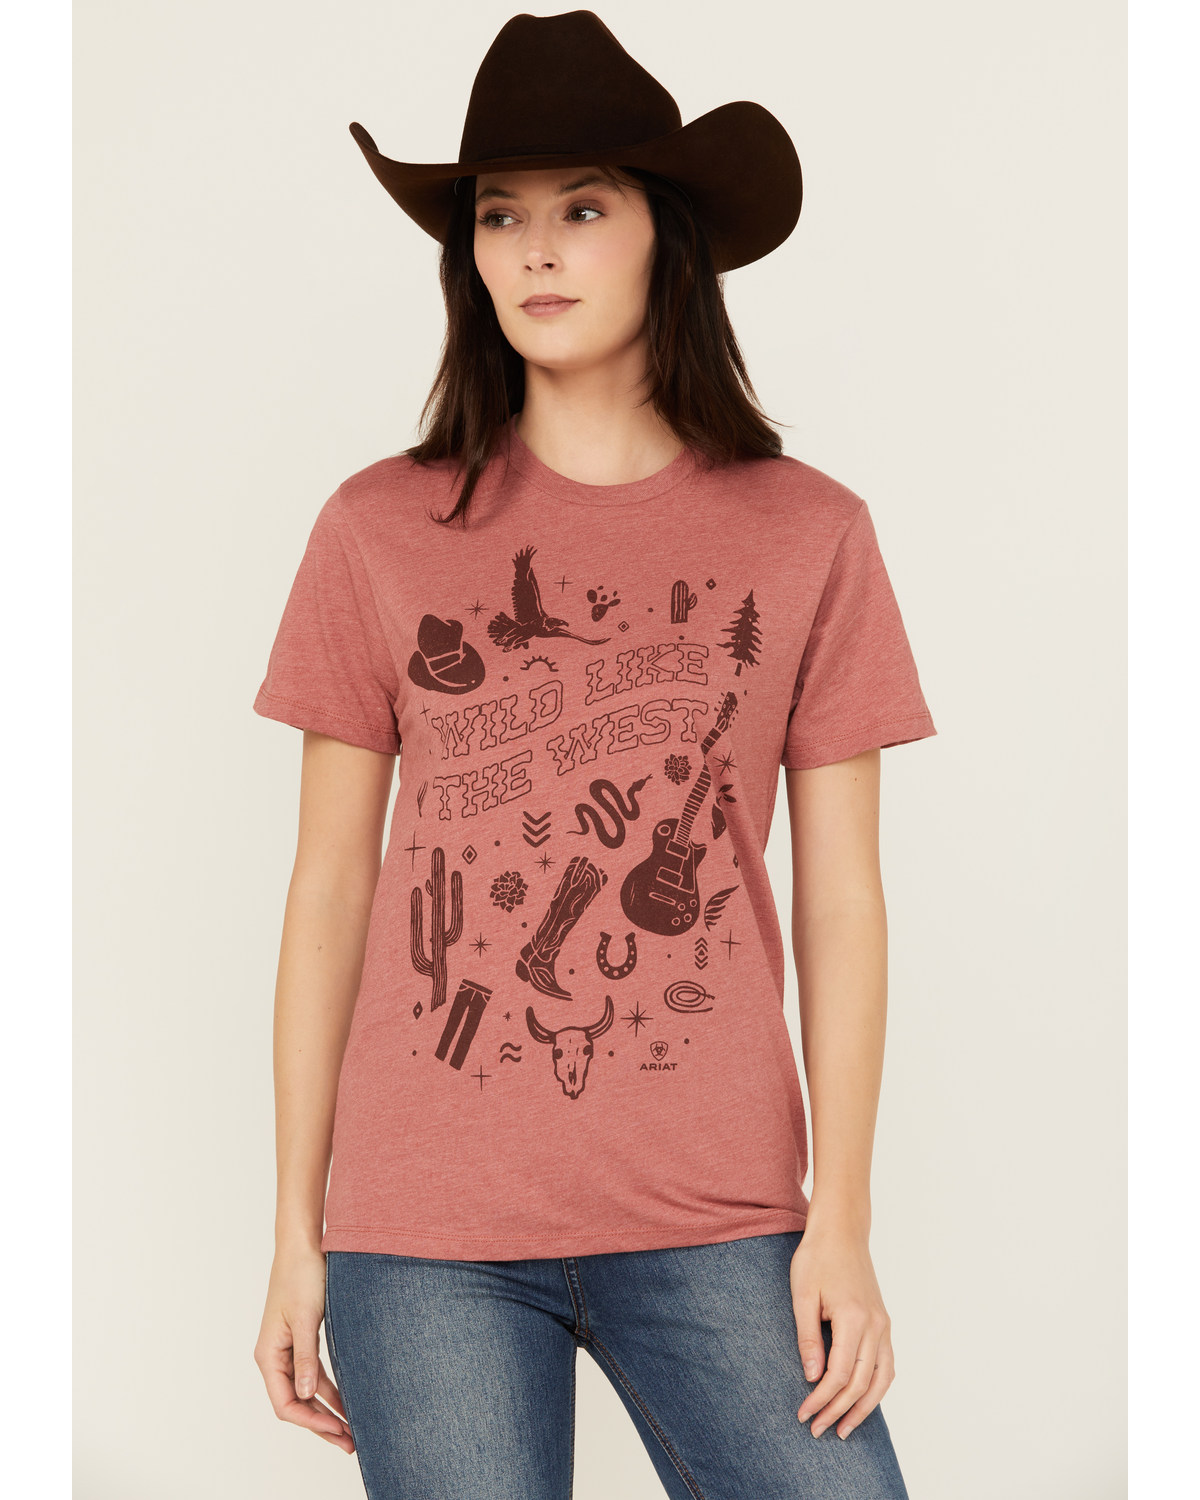 Ariat Women's Cowboy Country Short Sleeve Graphic Tee